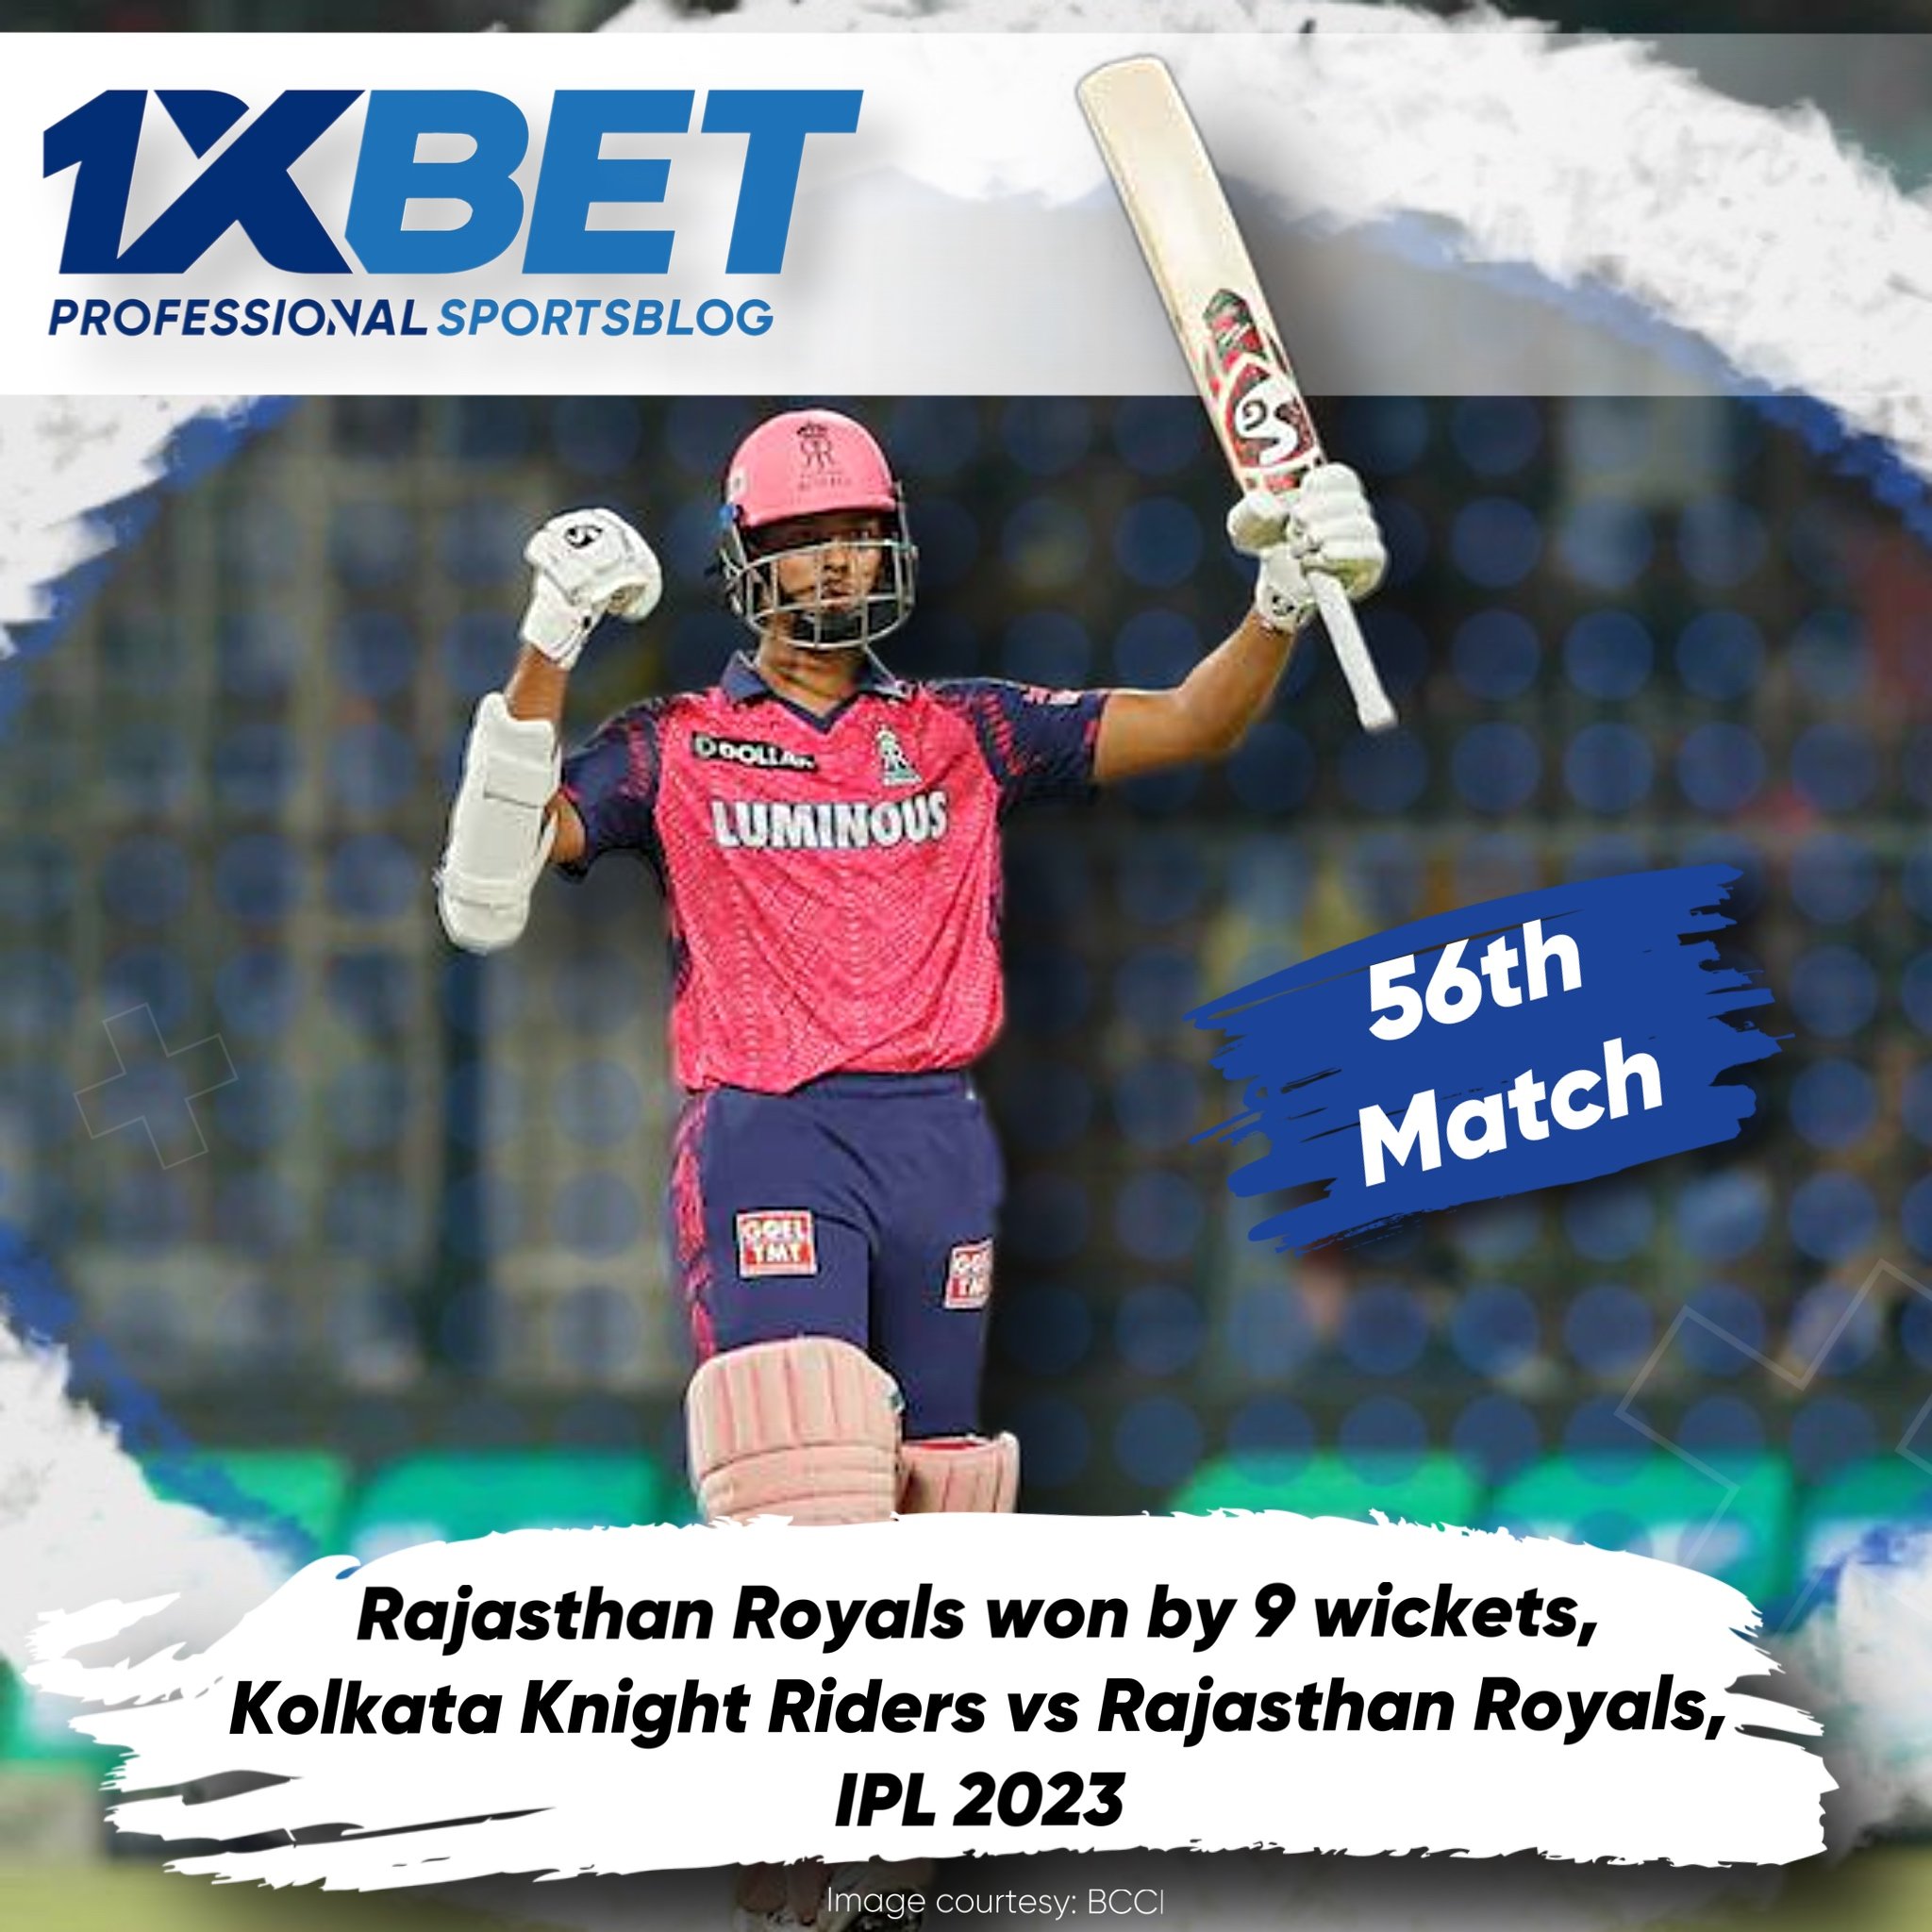 Rajasthan Royals won by 9 wickets